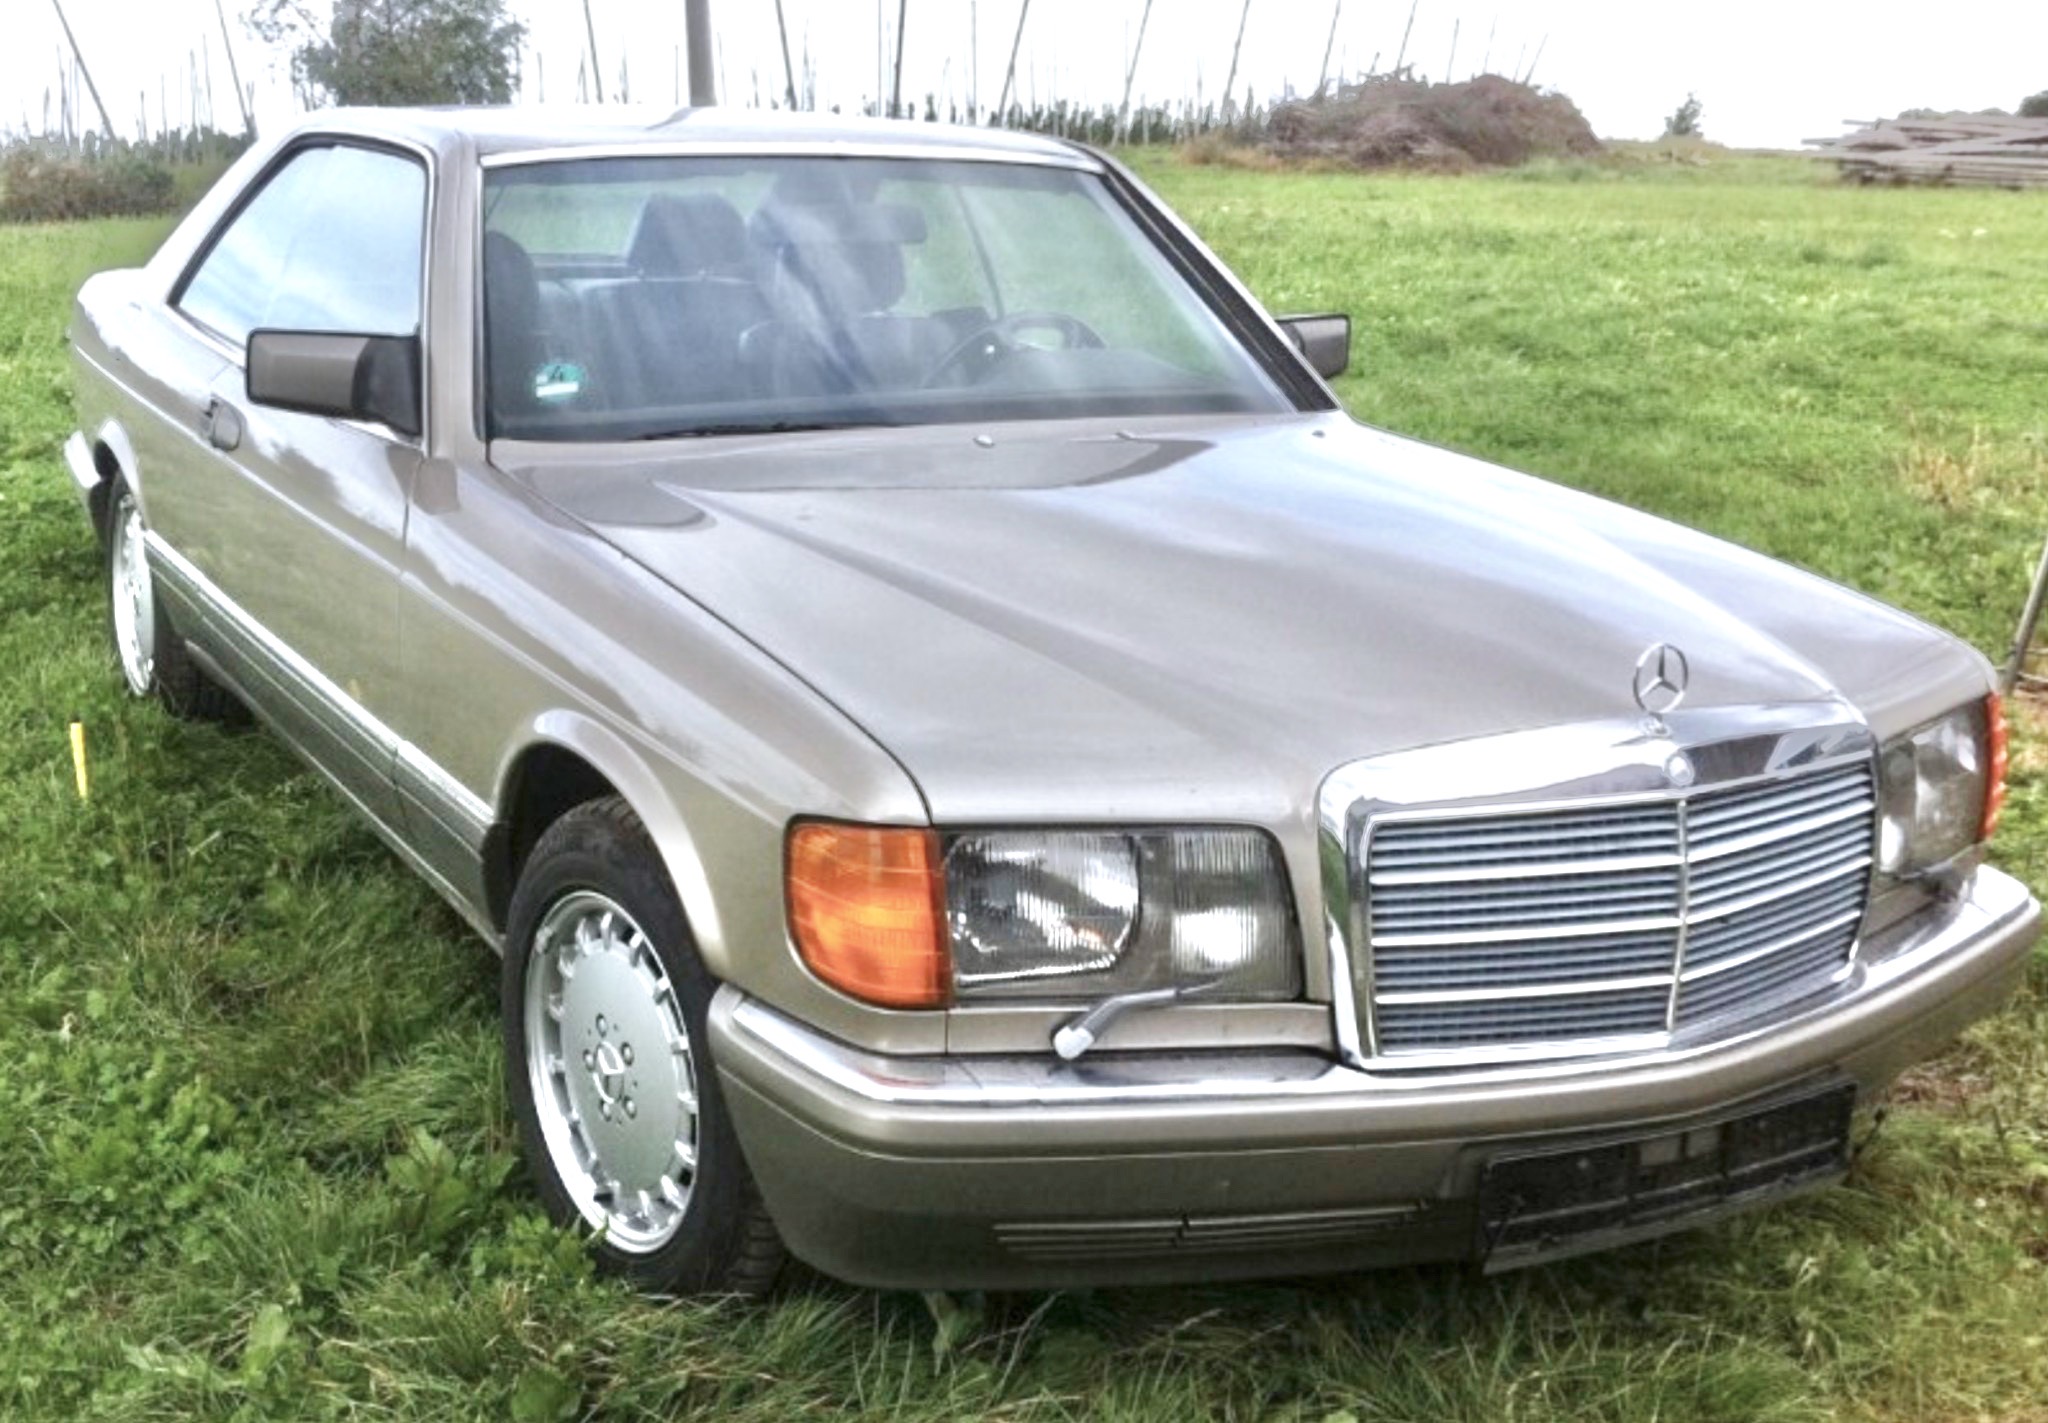 mercedes, 126, w126, c126, s-class, coupe, 1982, 1983, 1984, 1985, 1986, 1987, 1988, 1989, 1990, 1991